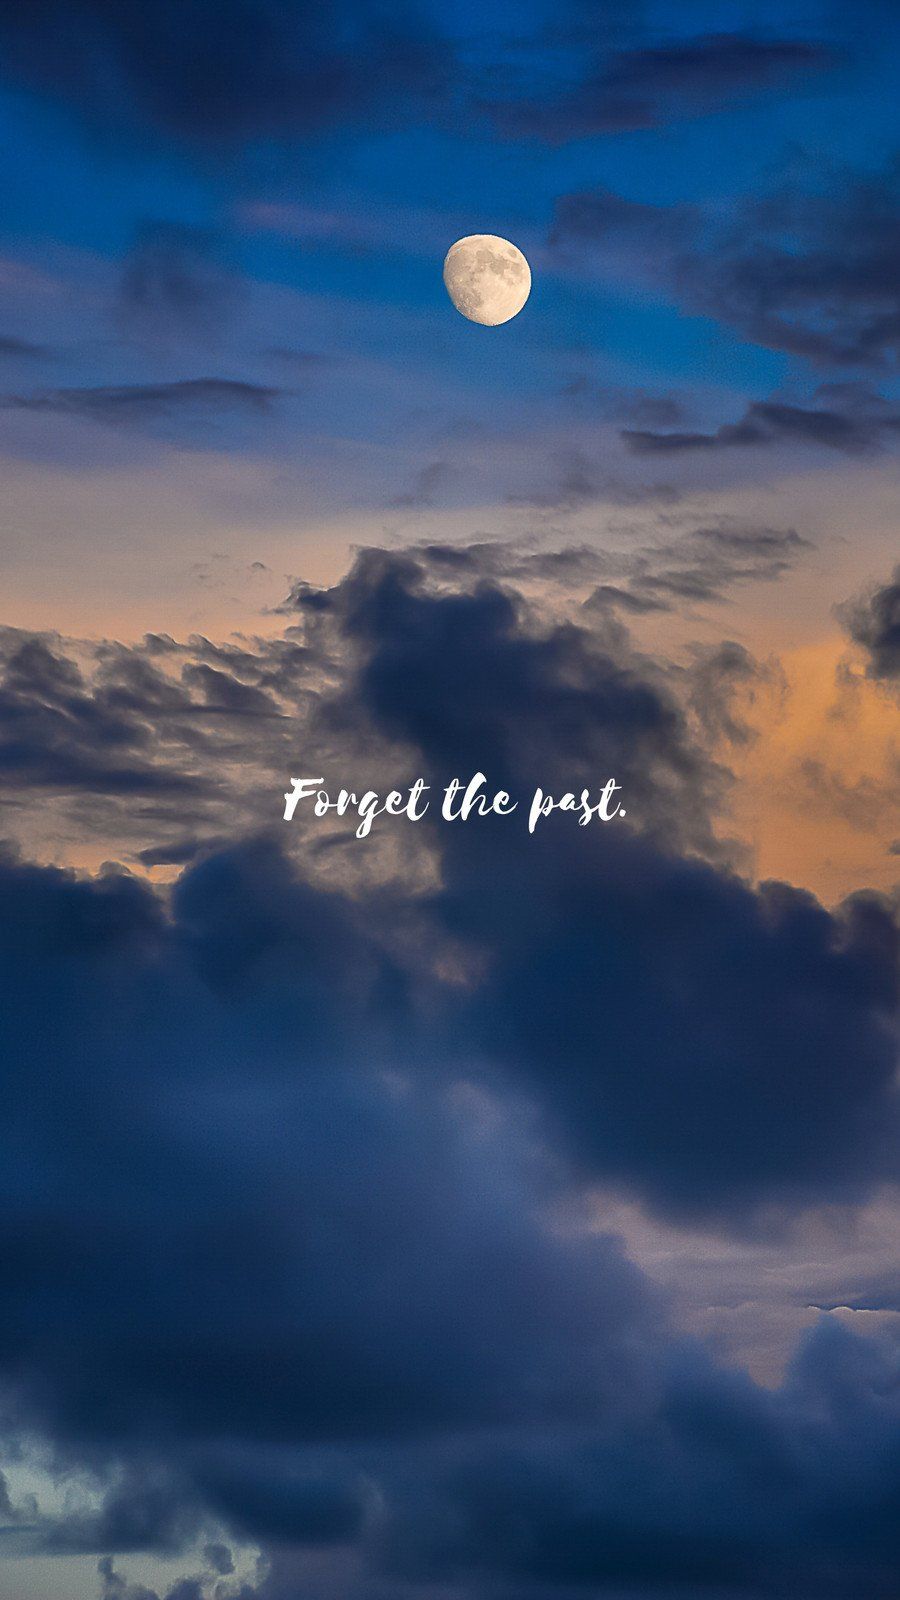 Clouds and moon wallpaper with the quote 